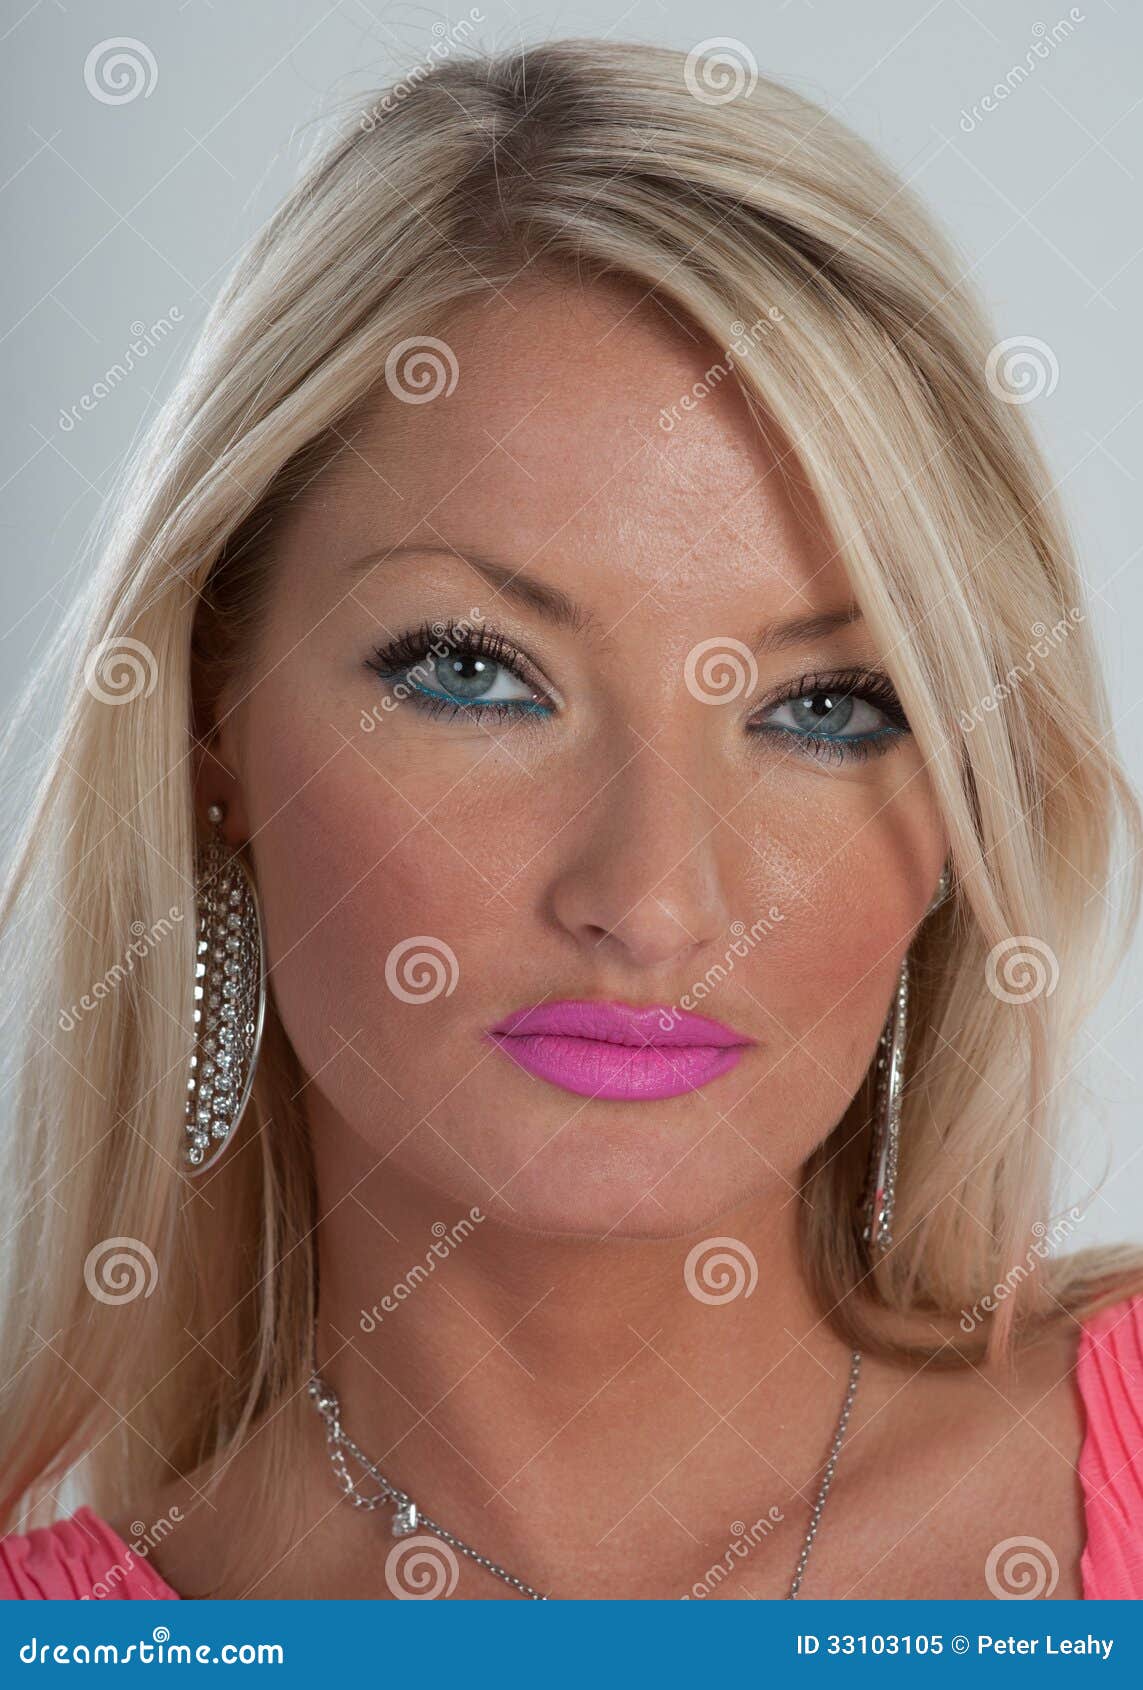 Pink Lipstick, Blue Eyes, And Blonde Hair Stock Image ...